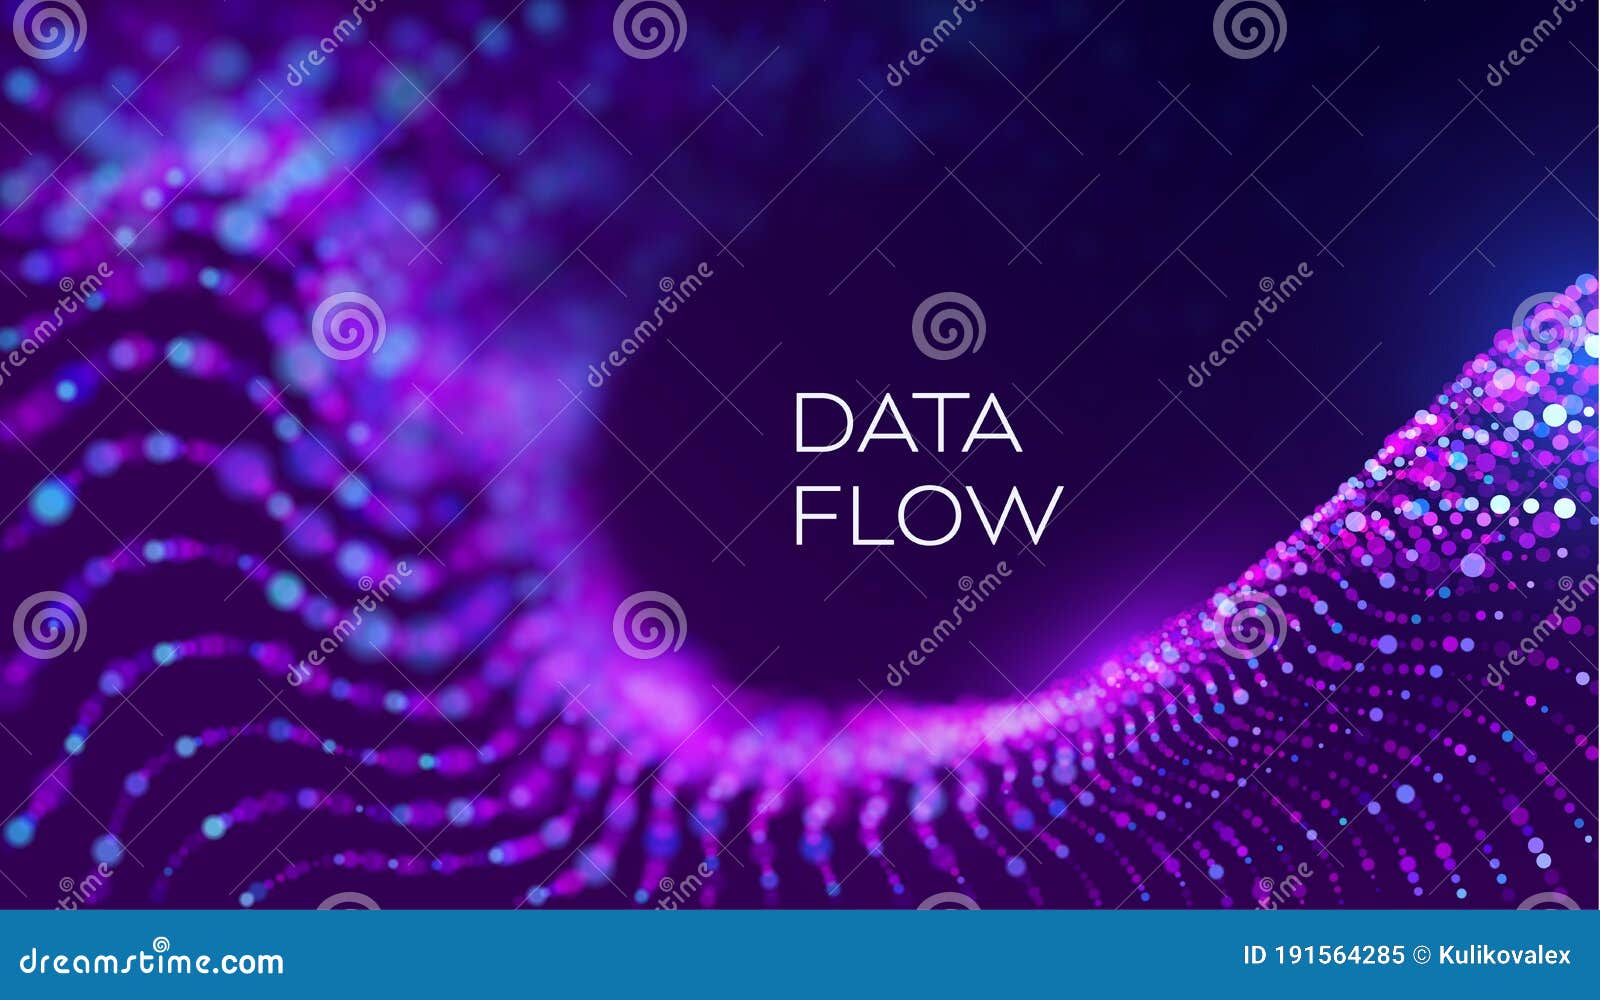 data flow wave in abstract style on purple background. multithreading technology . bigdata twisting innovation